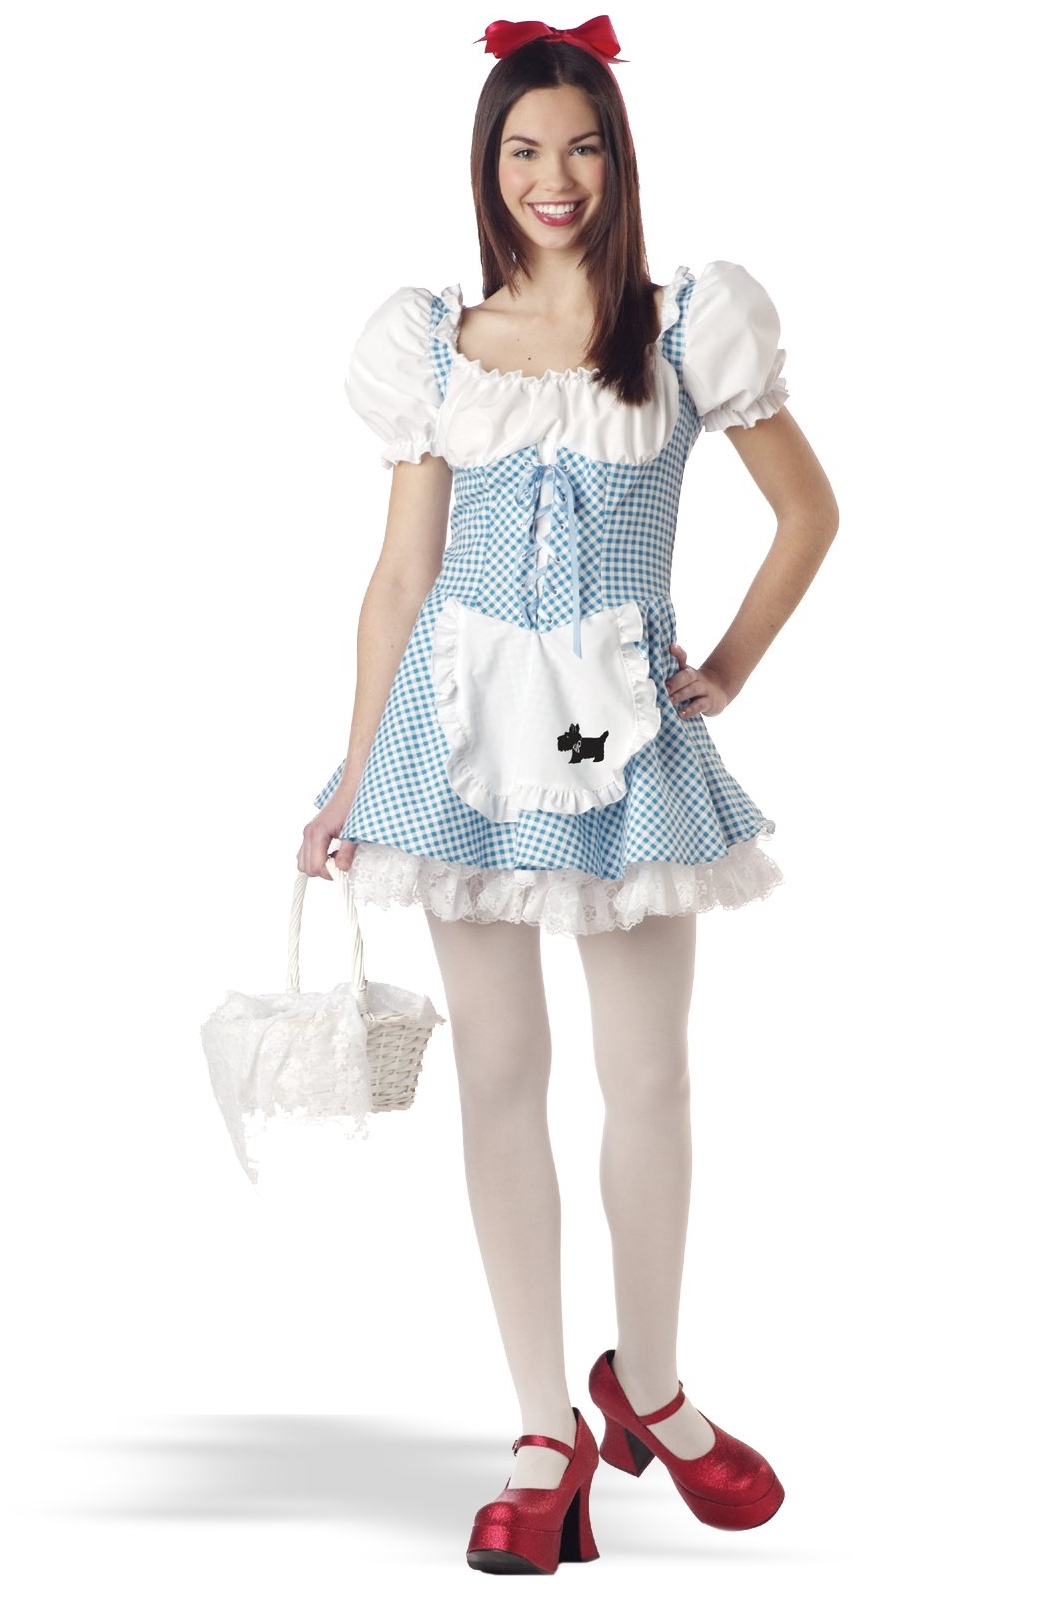 Auburn Teen Lolita wearing White Opaque Pantyhose and White and Blue Apron